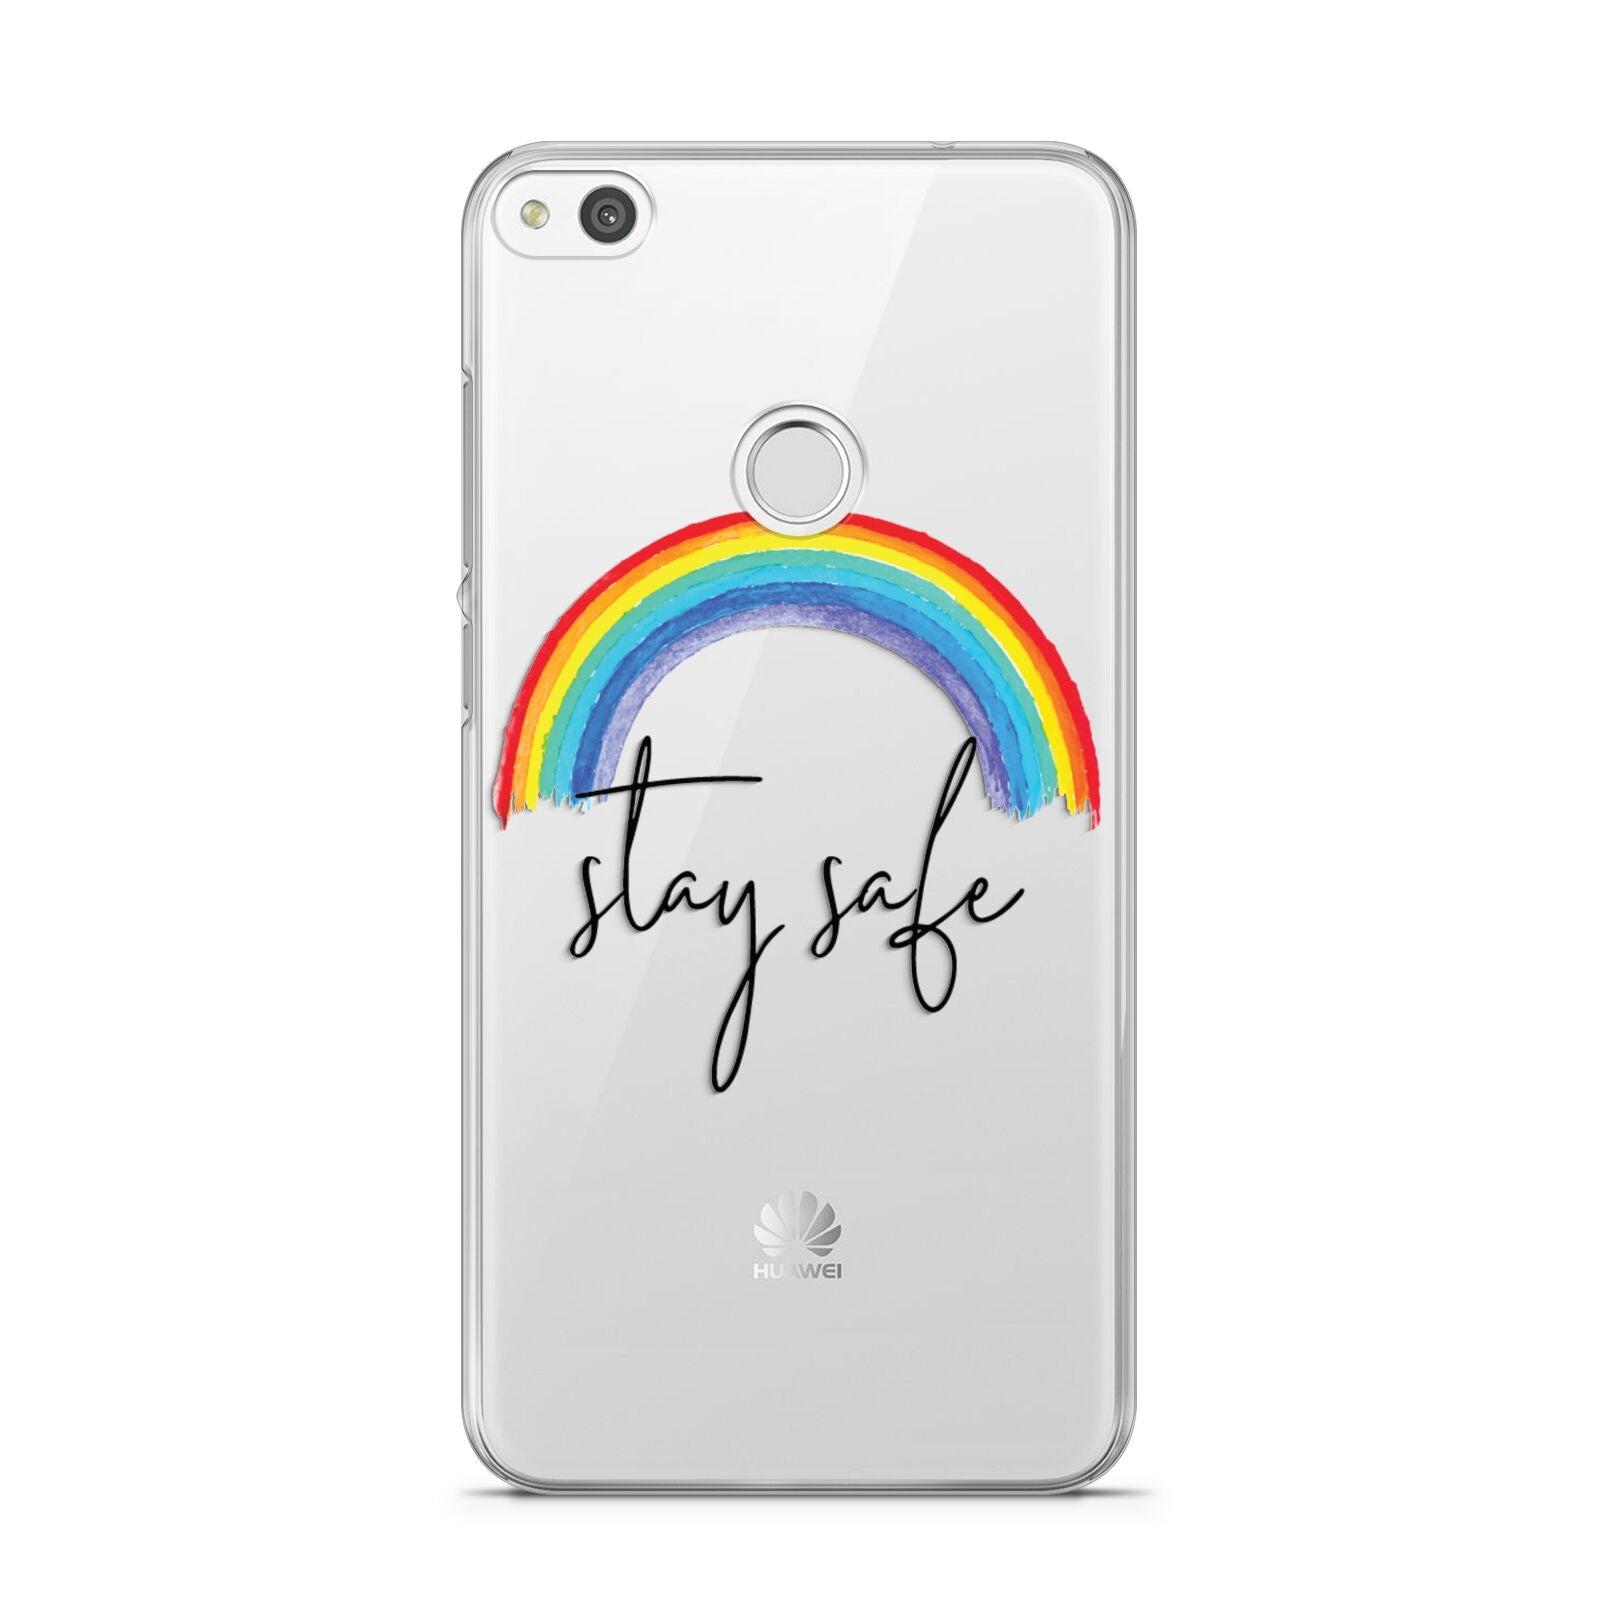 Stay Safe Rainbow Huawei P8 Lite Case